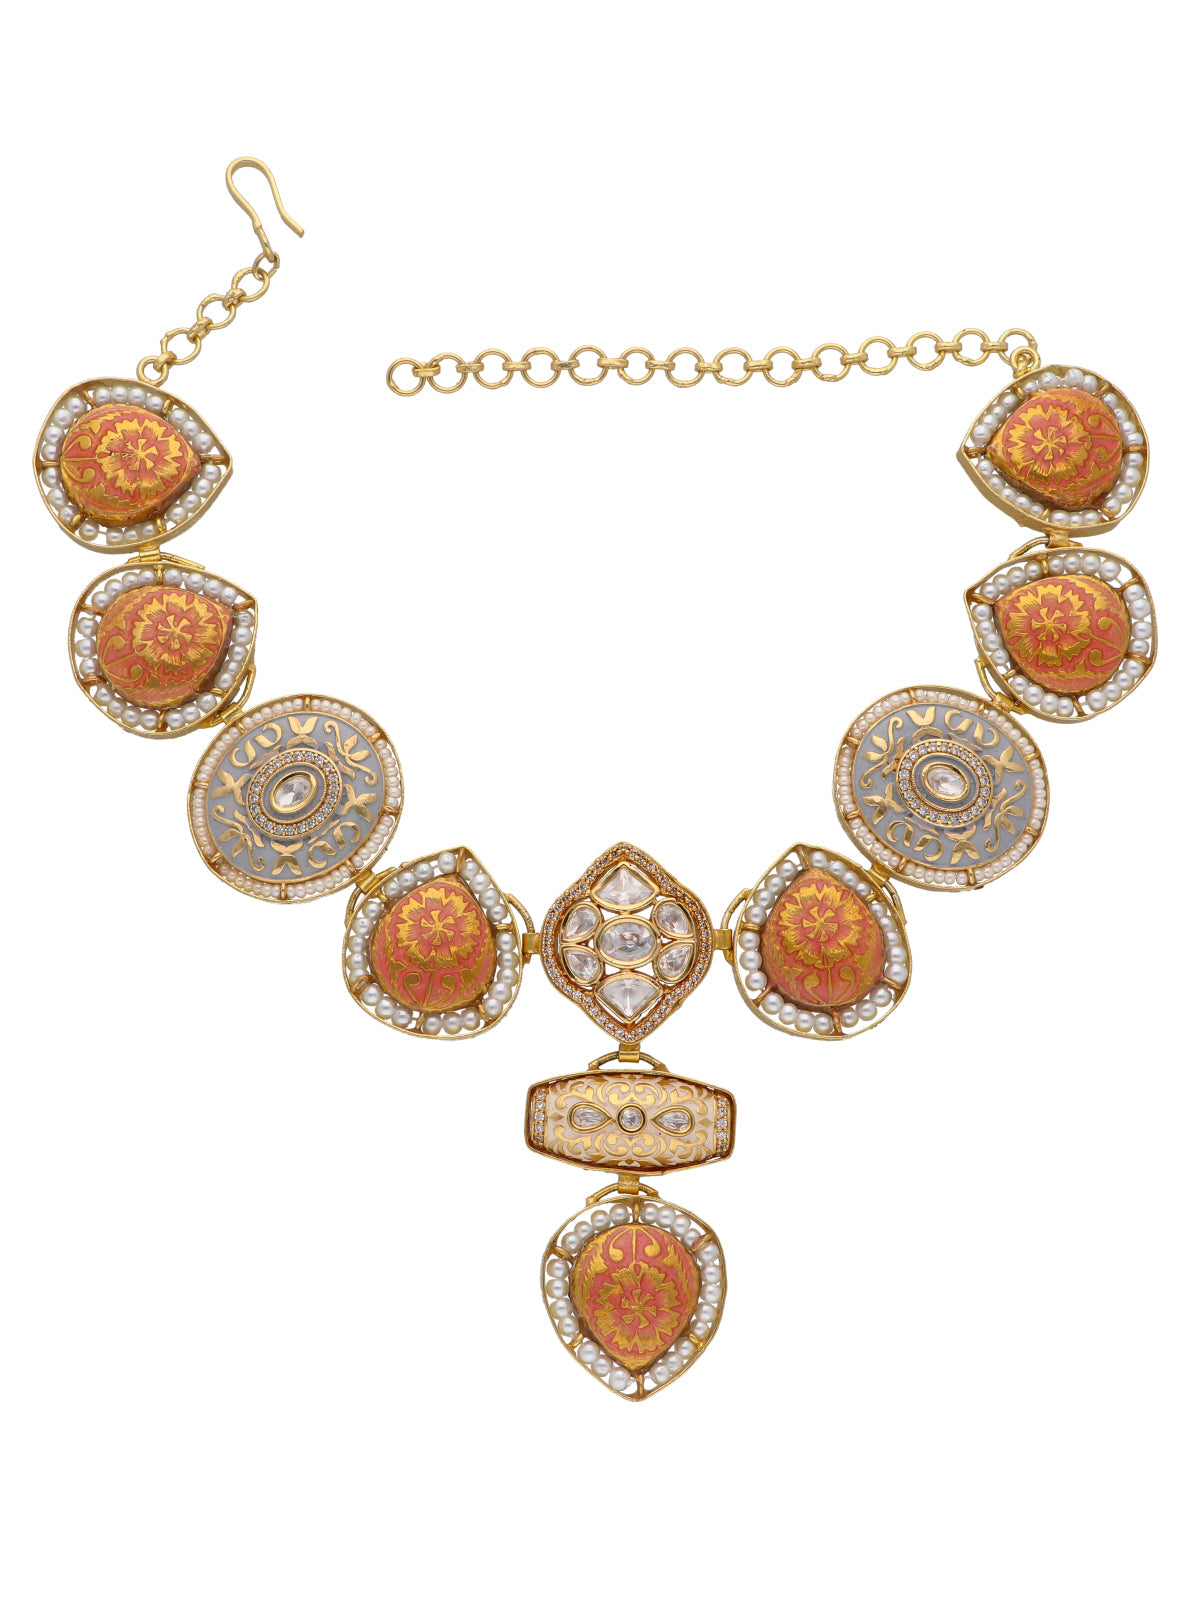 The Zoya Coral and Blue Meenakari Necklace Set 